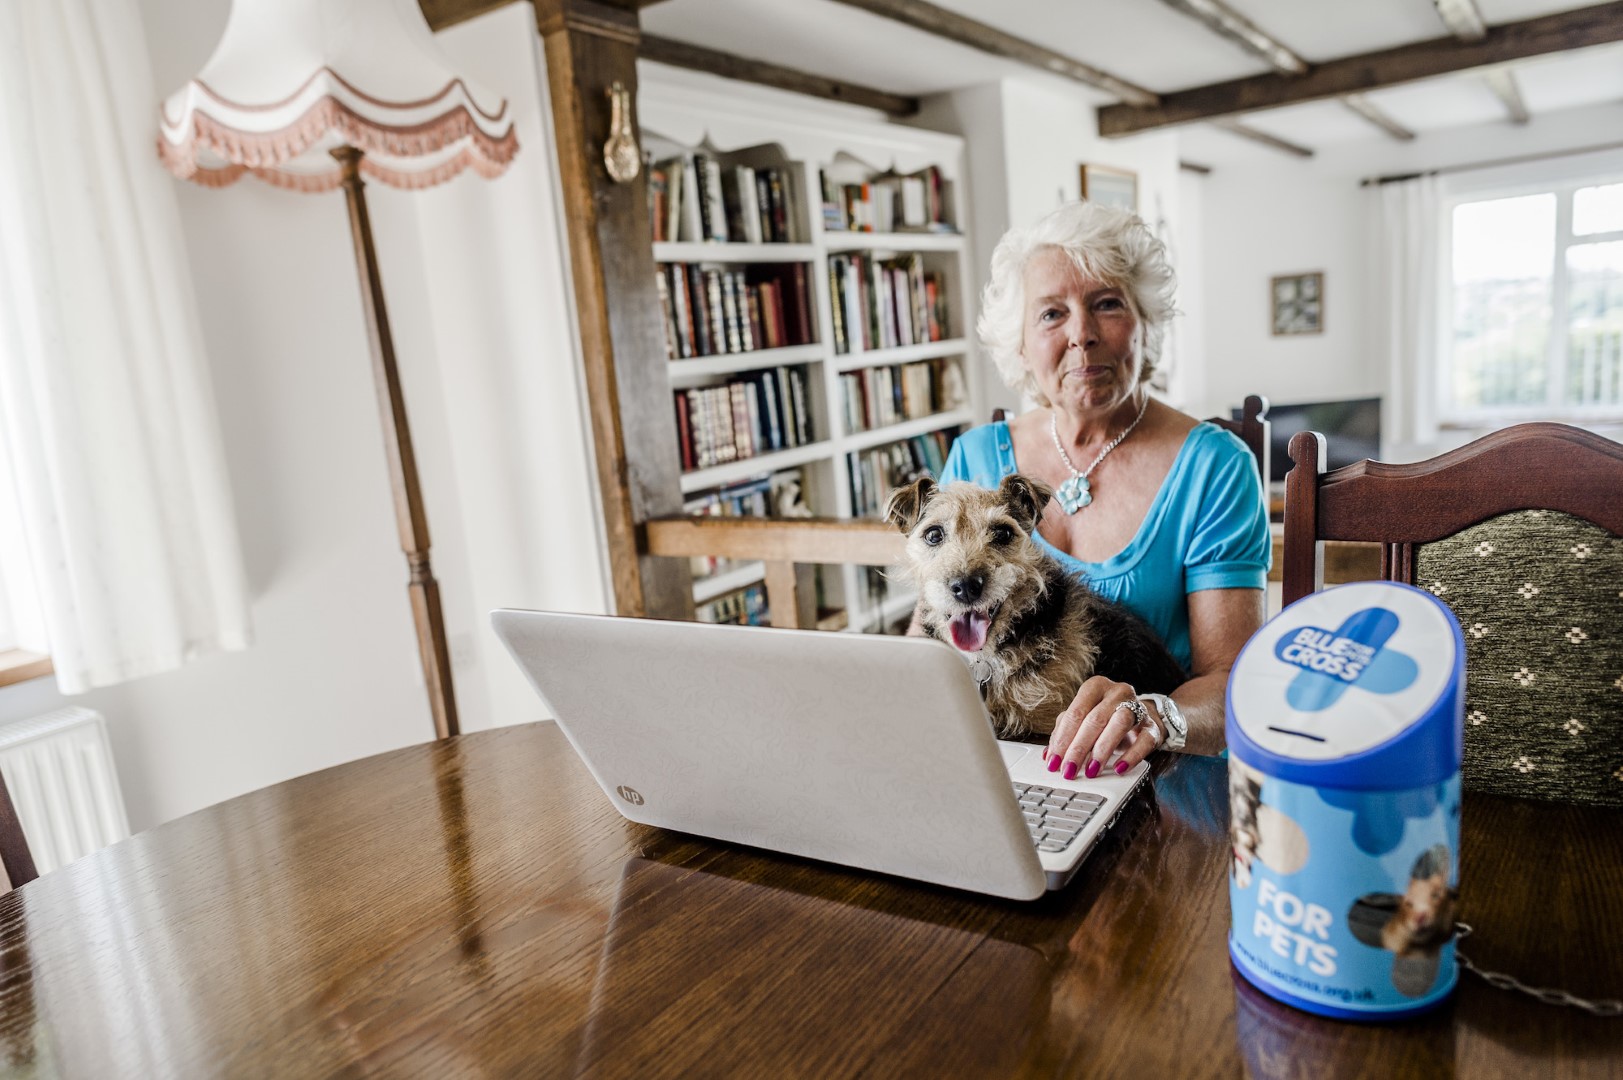 Female fundraiser with dog and laptop